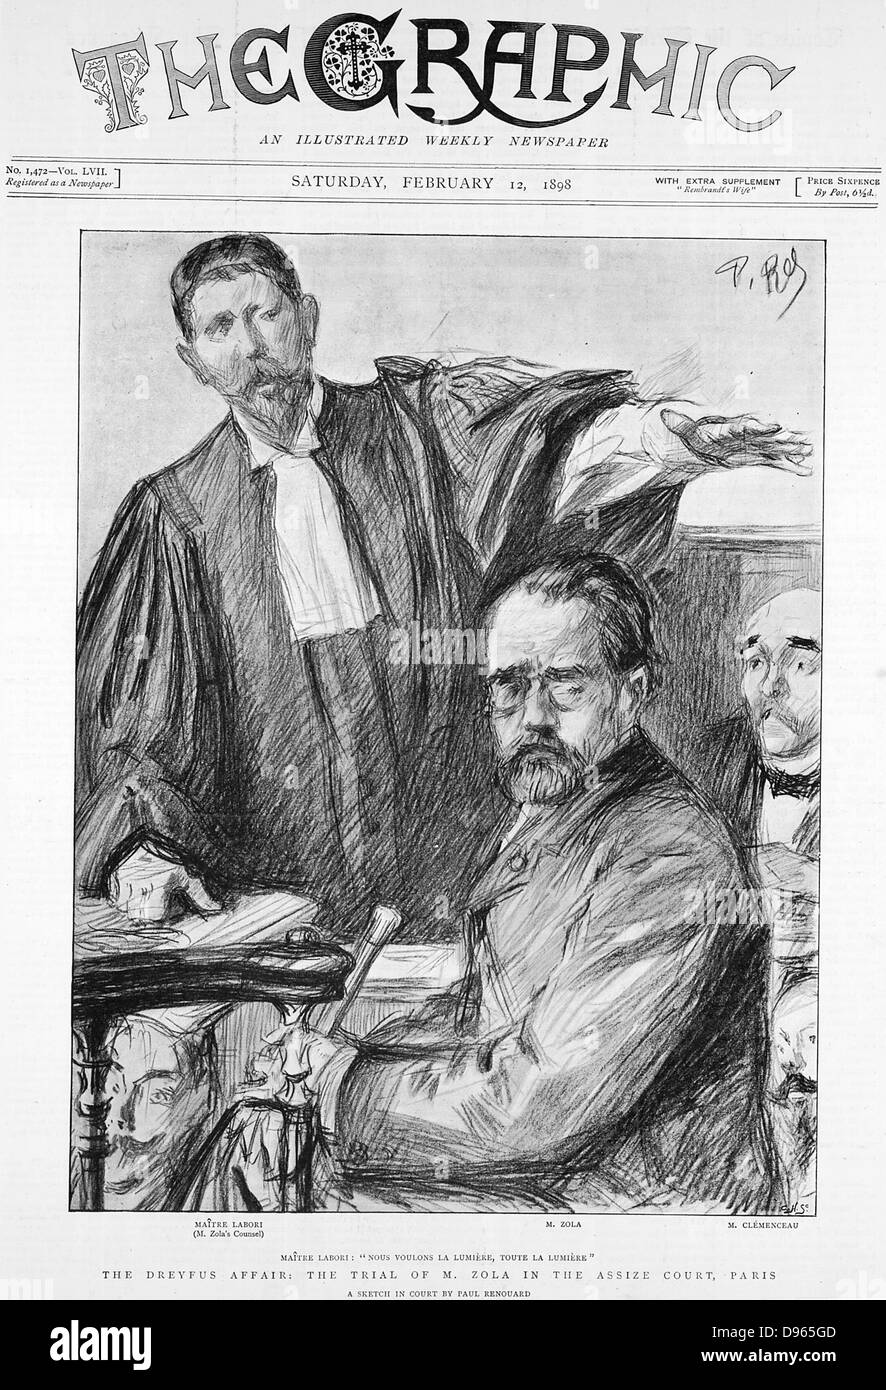 Emile Zola (1840-1902) French novelist, on trial for defamation of French military authorities for writing a letter to the press referring to the Esterhazy court martial in his effort to obtain justice for Alfred Dreyfus c1859-1935). Sentenced to a year in prison but escaped to England. From 'The Graphic', London, 12 February 1898. Stock Photo